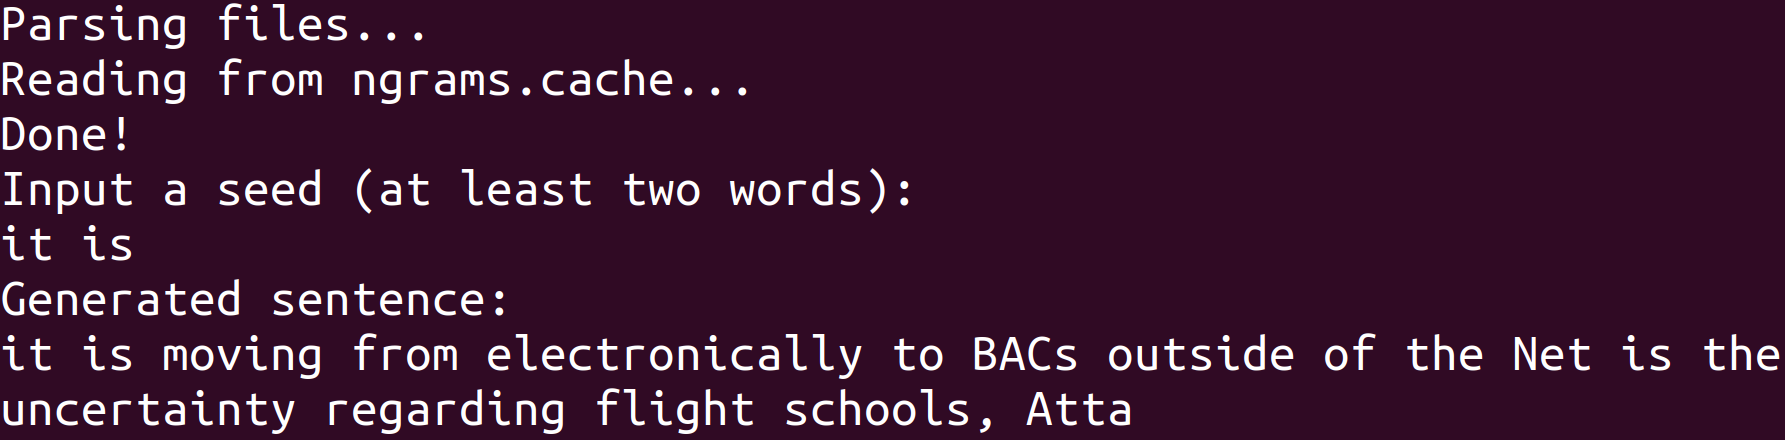 A randomly generated sentence based on a prompt